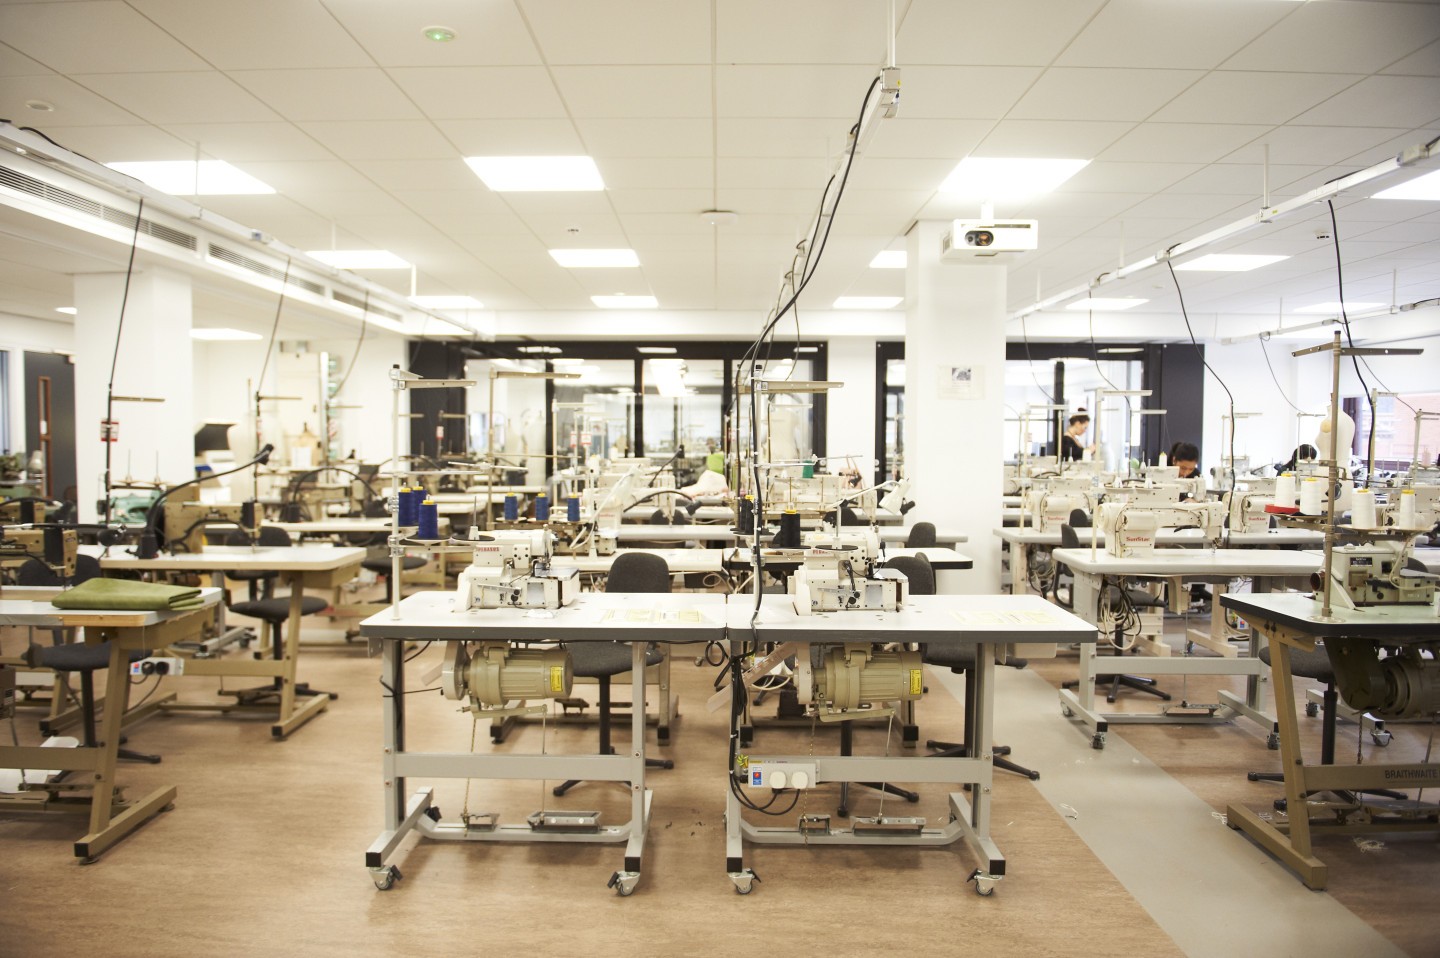 Sewing machine room at Manchester Fashion Institute